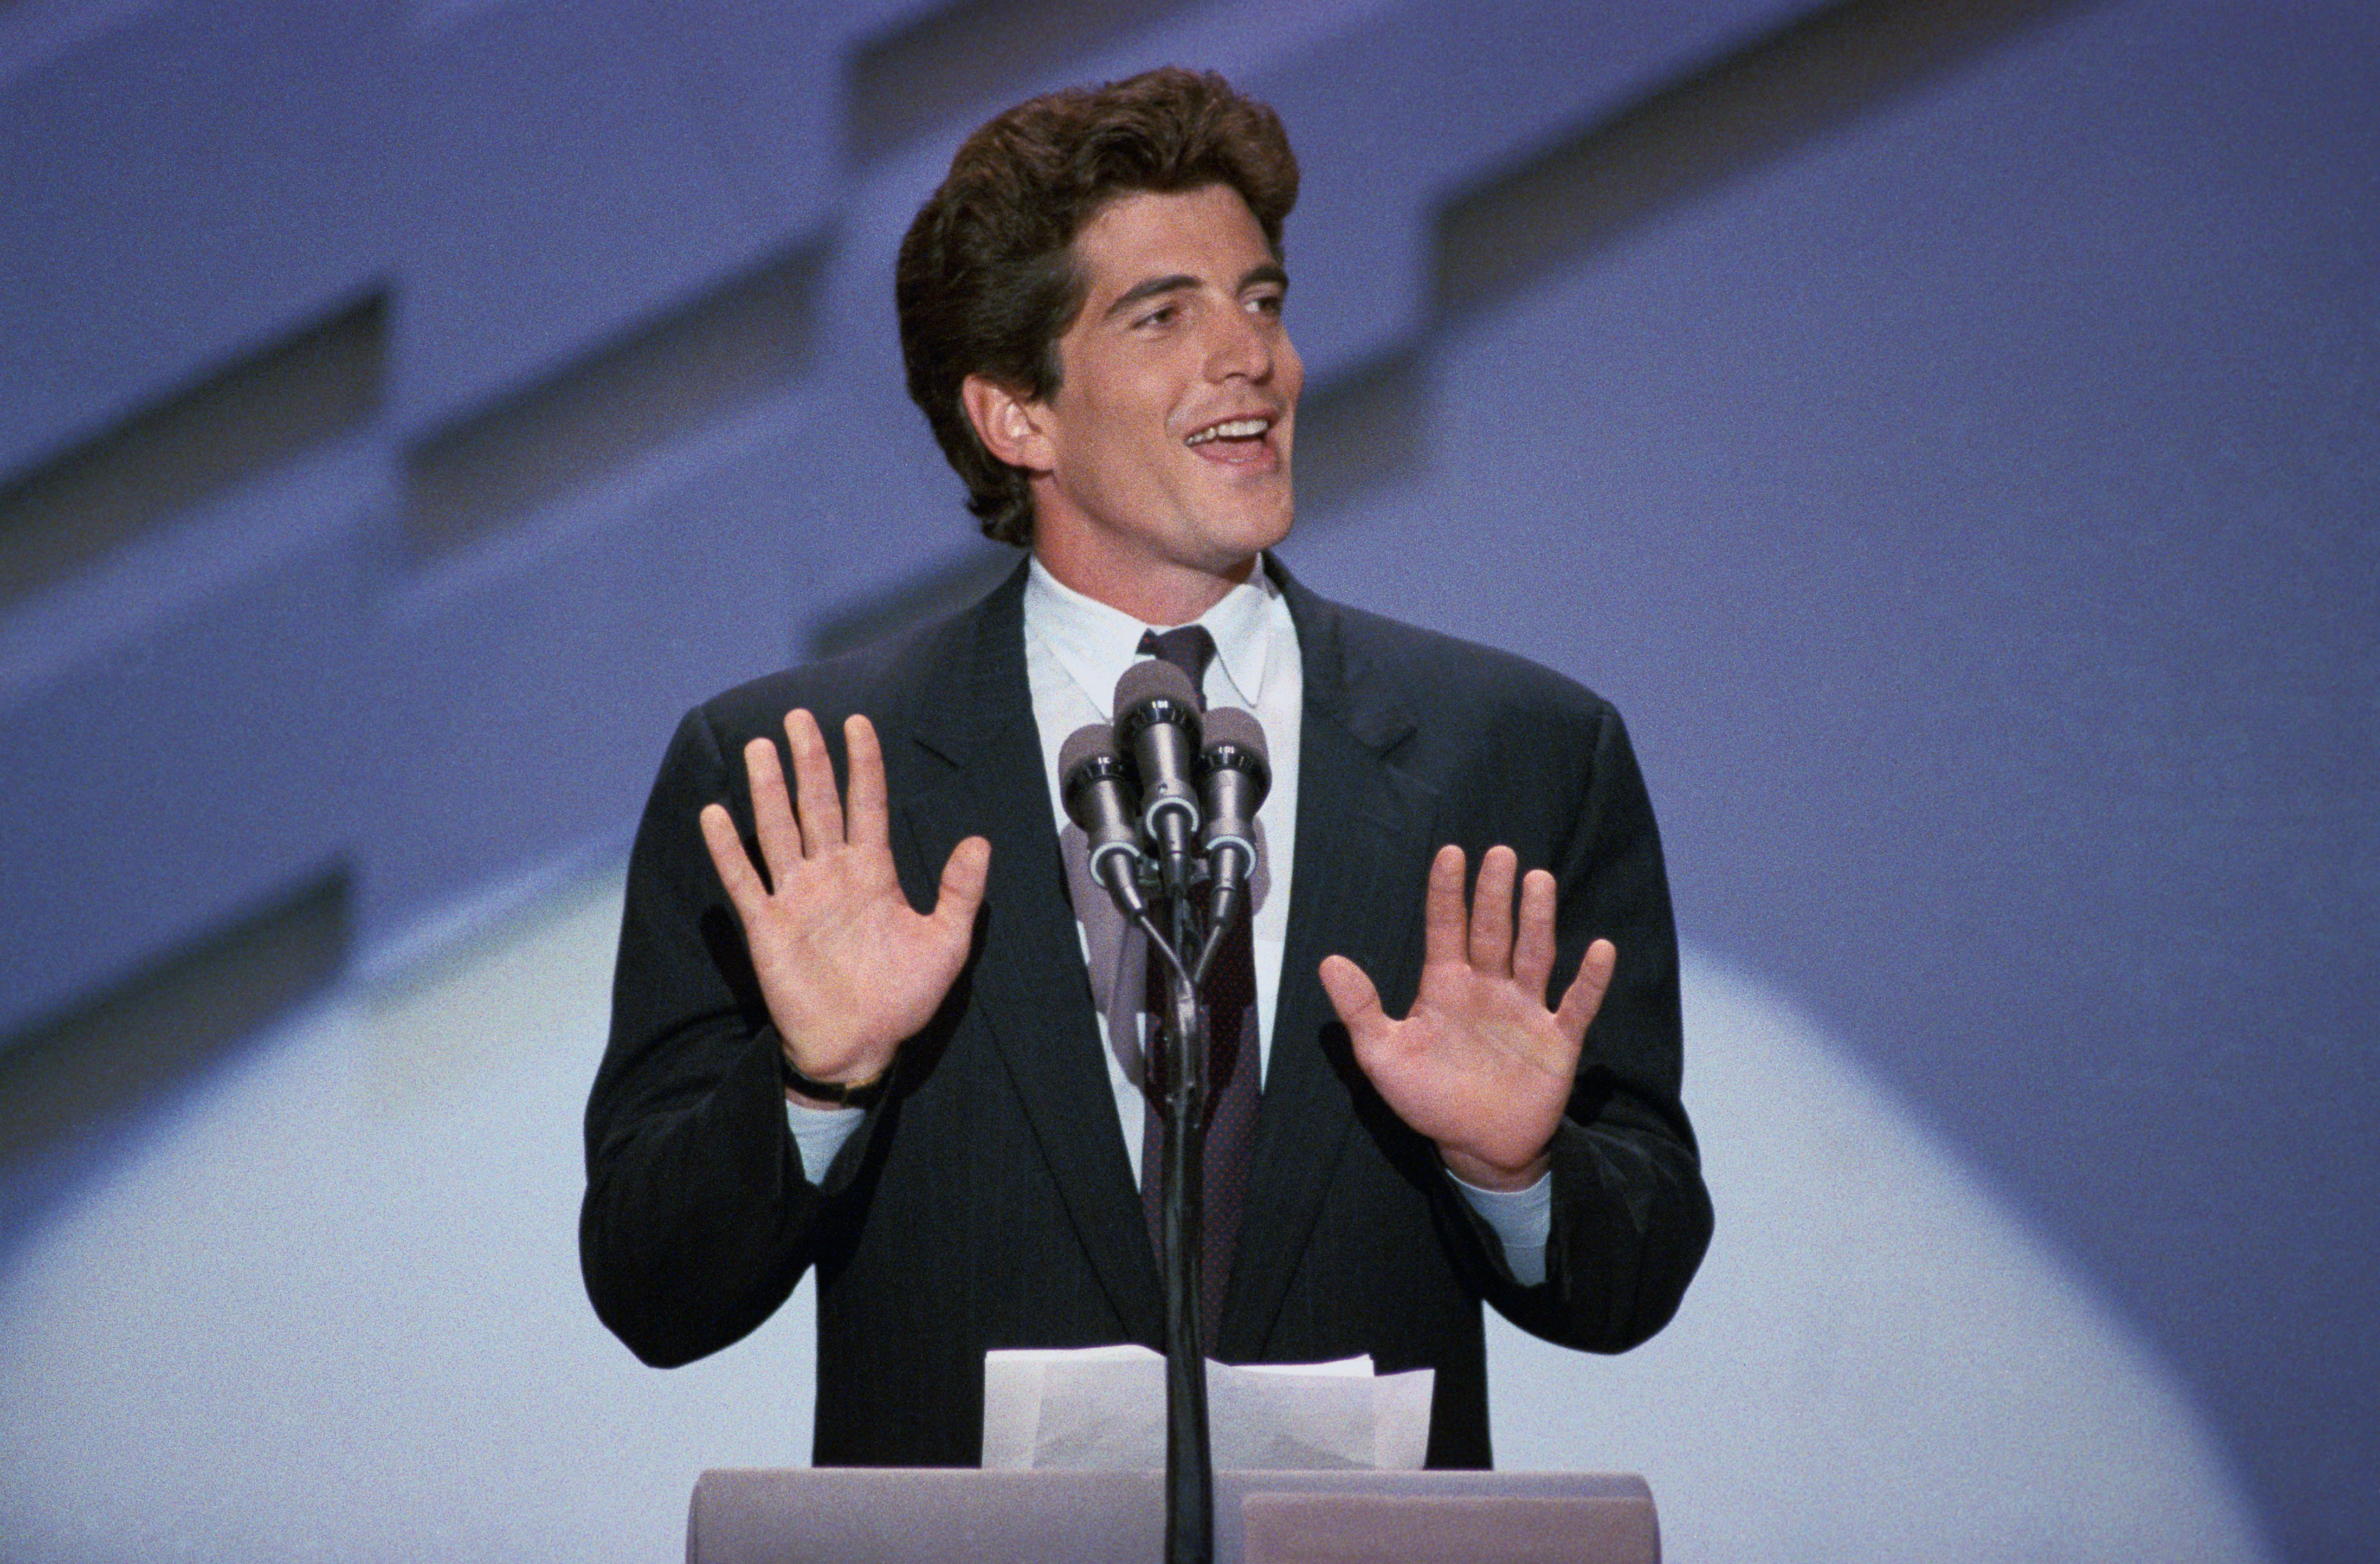 Remembering John F. Kennedy Jr.: ‘He Probably Would Have Run for President’